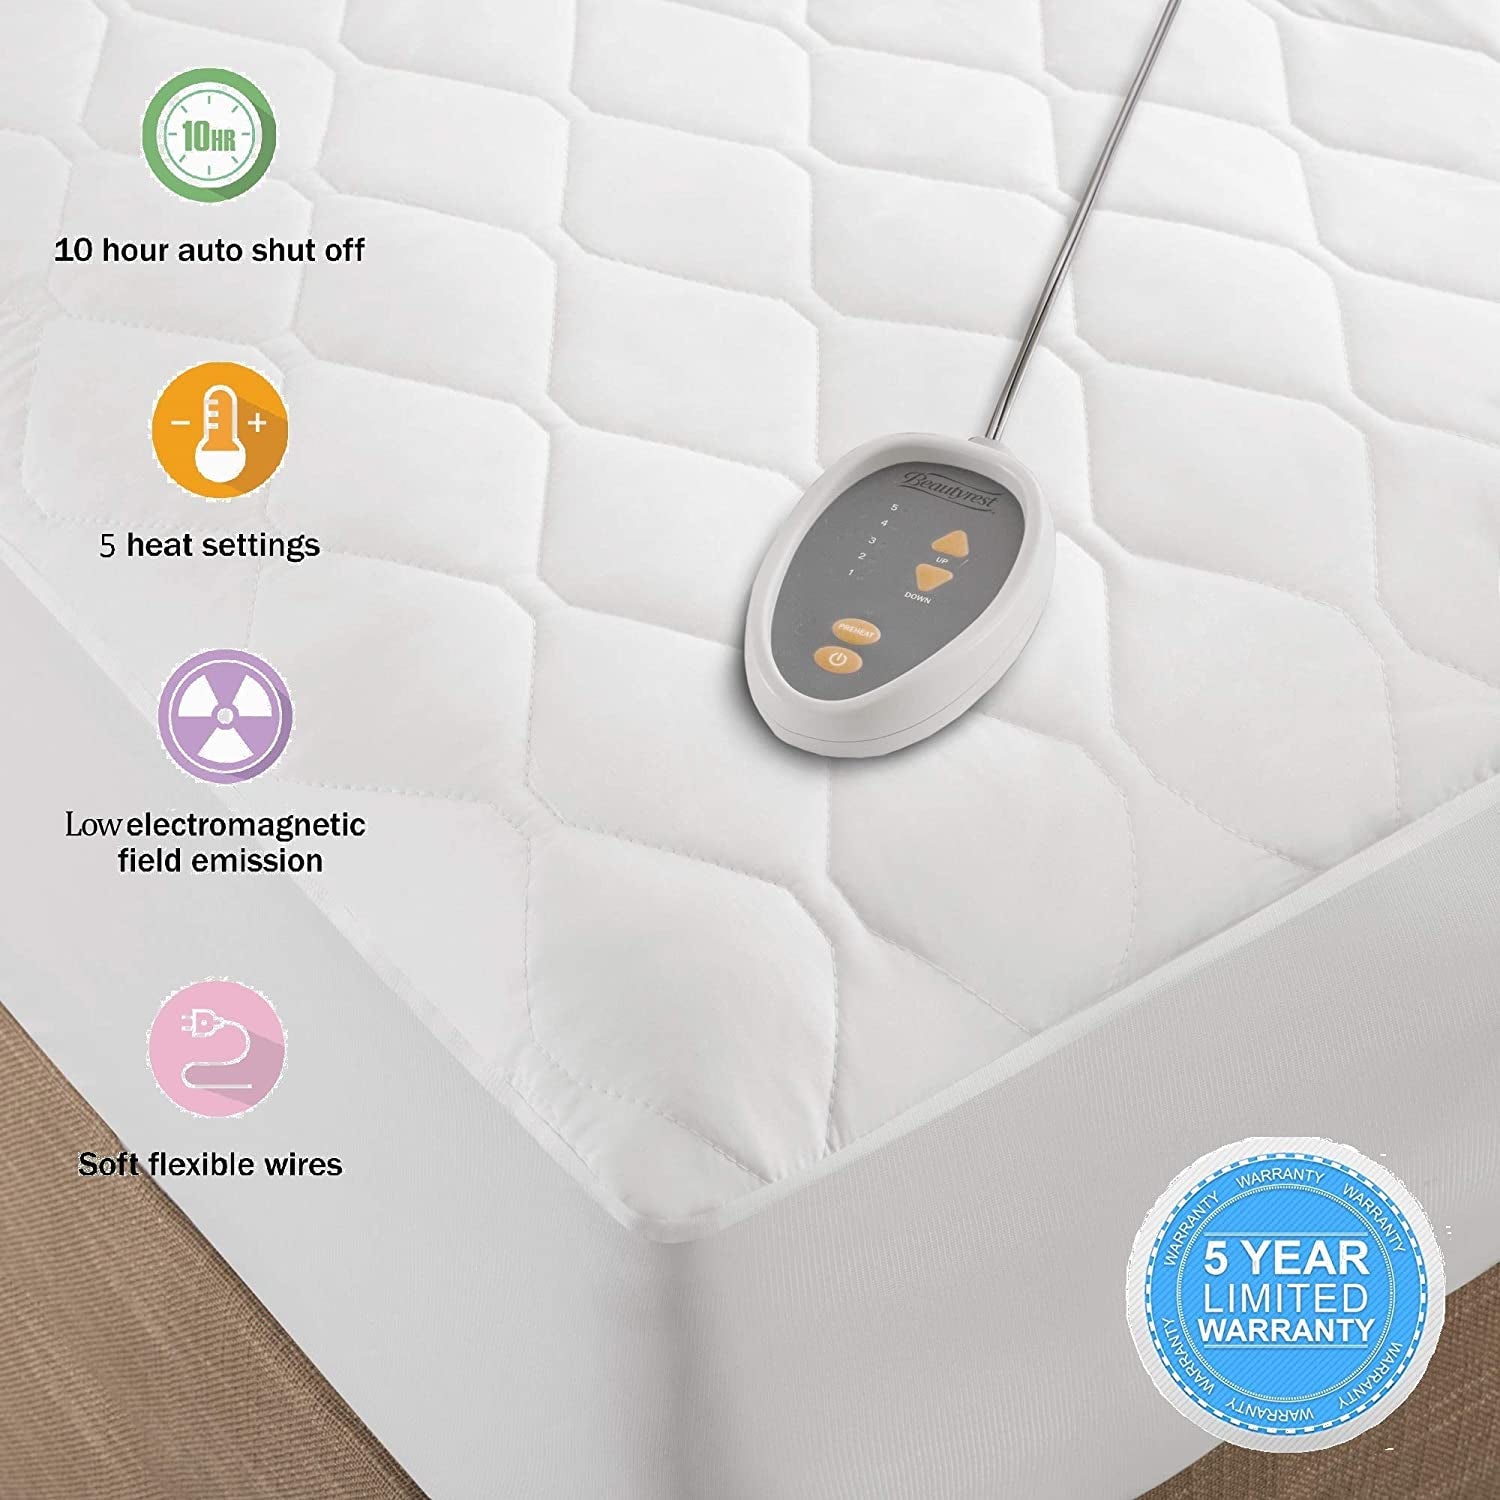 Beautyrest 3M Scotchgard Heated Mattress Pad - Electric Bed Warmer with 5 Heat Settings, 10 Hr Auto Shut off Timer, All around Elastic Deep Pocket, UL Certified, Machine Washable, White Full